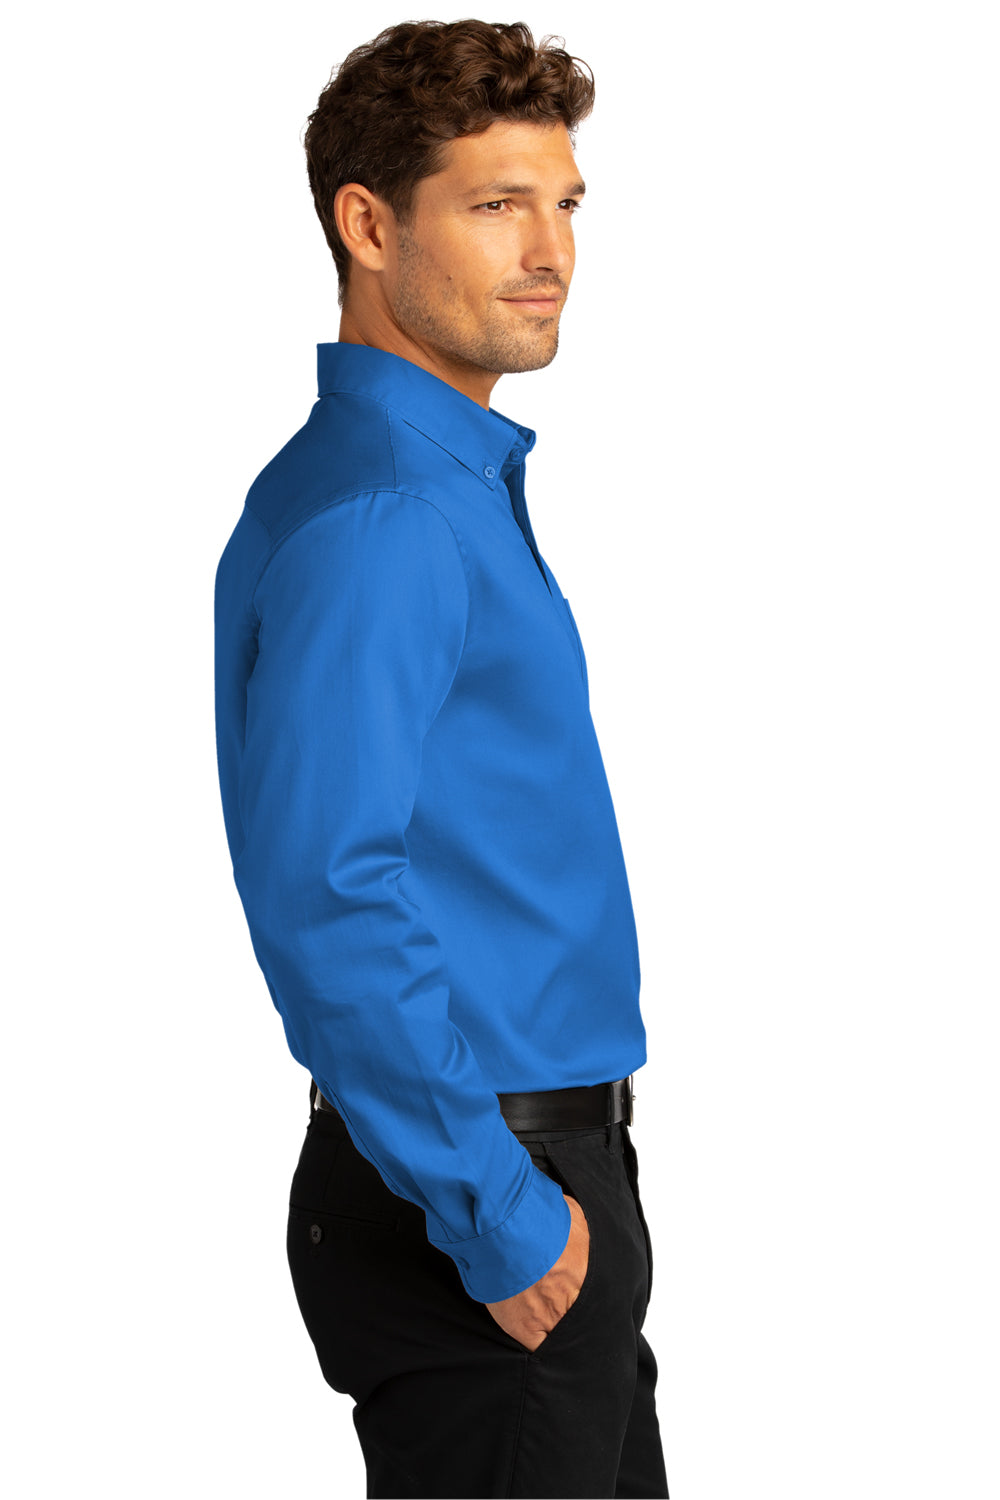 Port Authority Mens SuperPro Wrinkle Resistant React Long Sleeve Button Down Shirt w/ Pocket Strong Blue Side